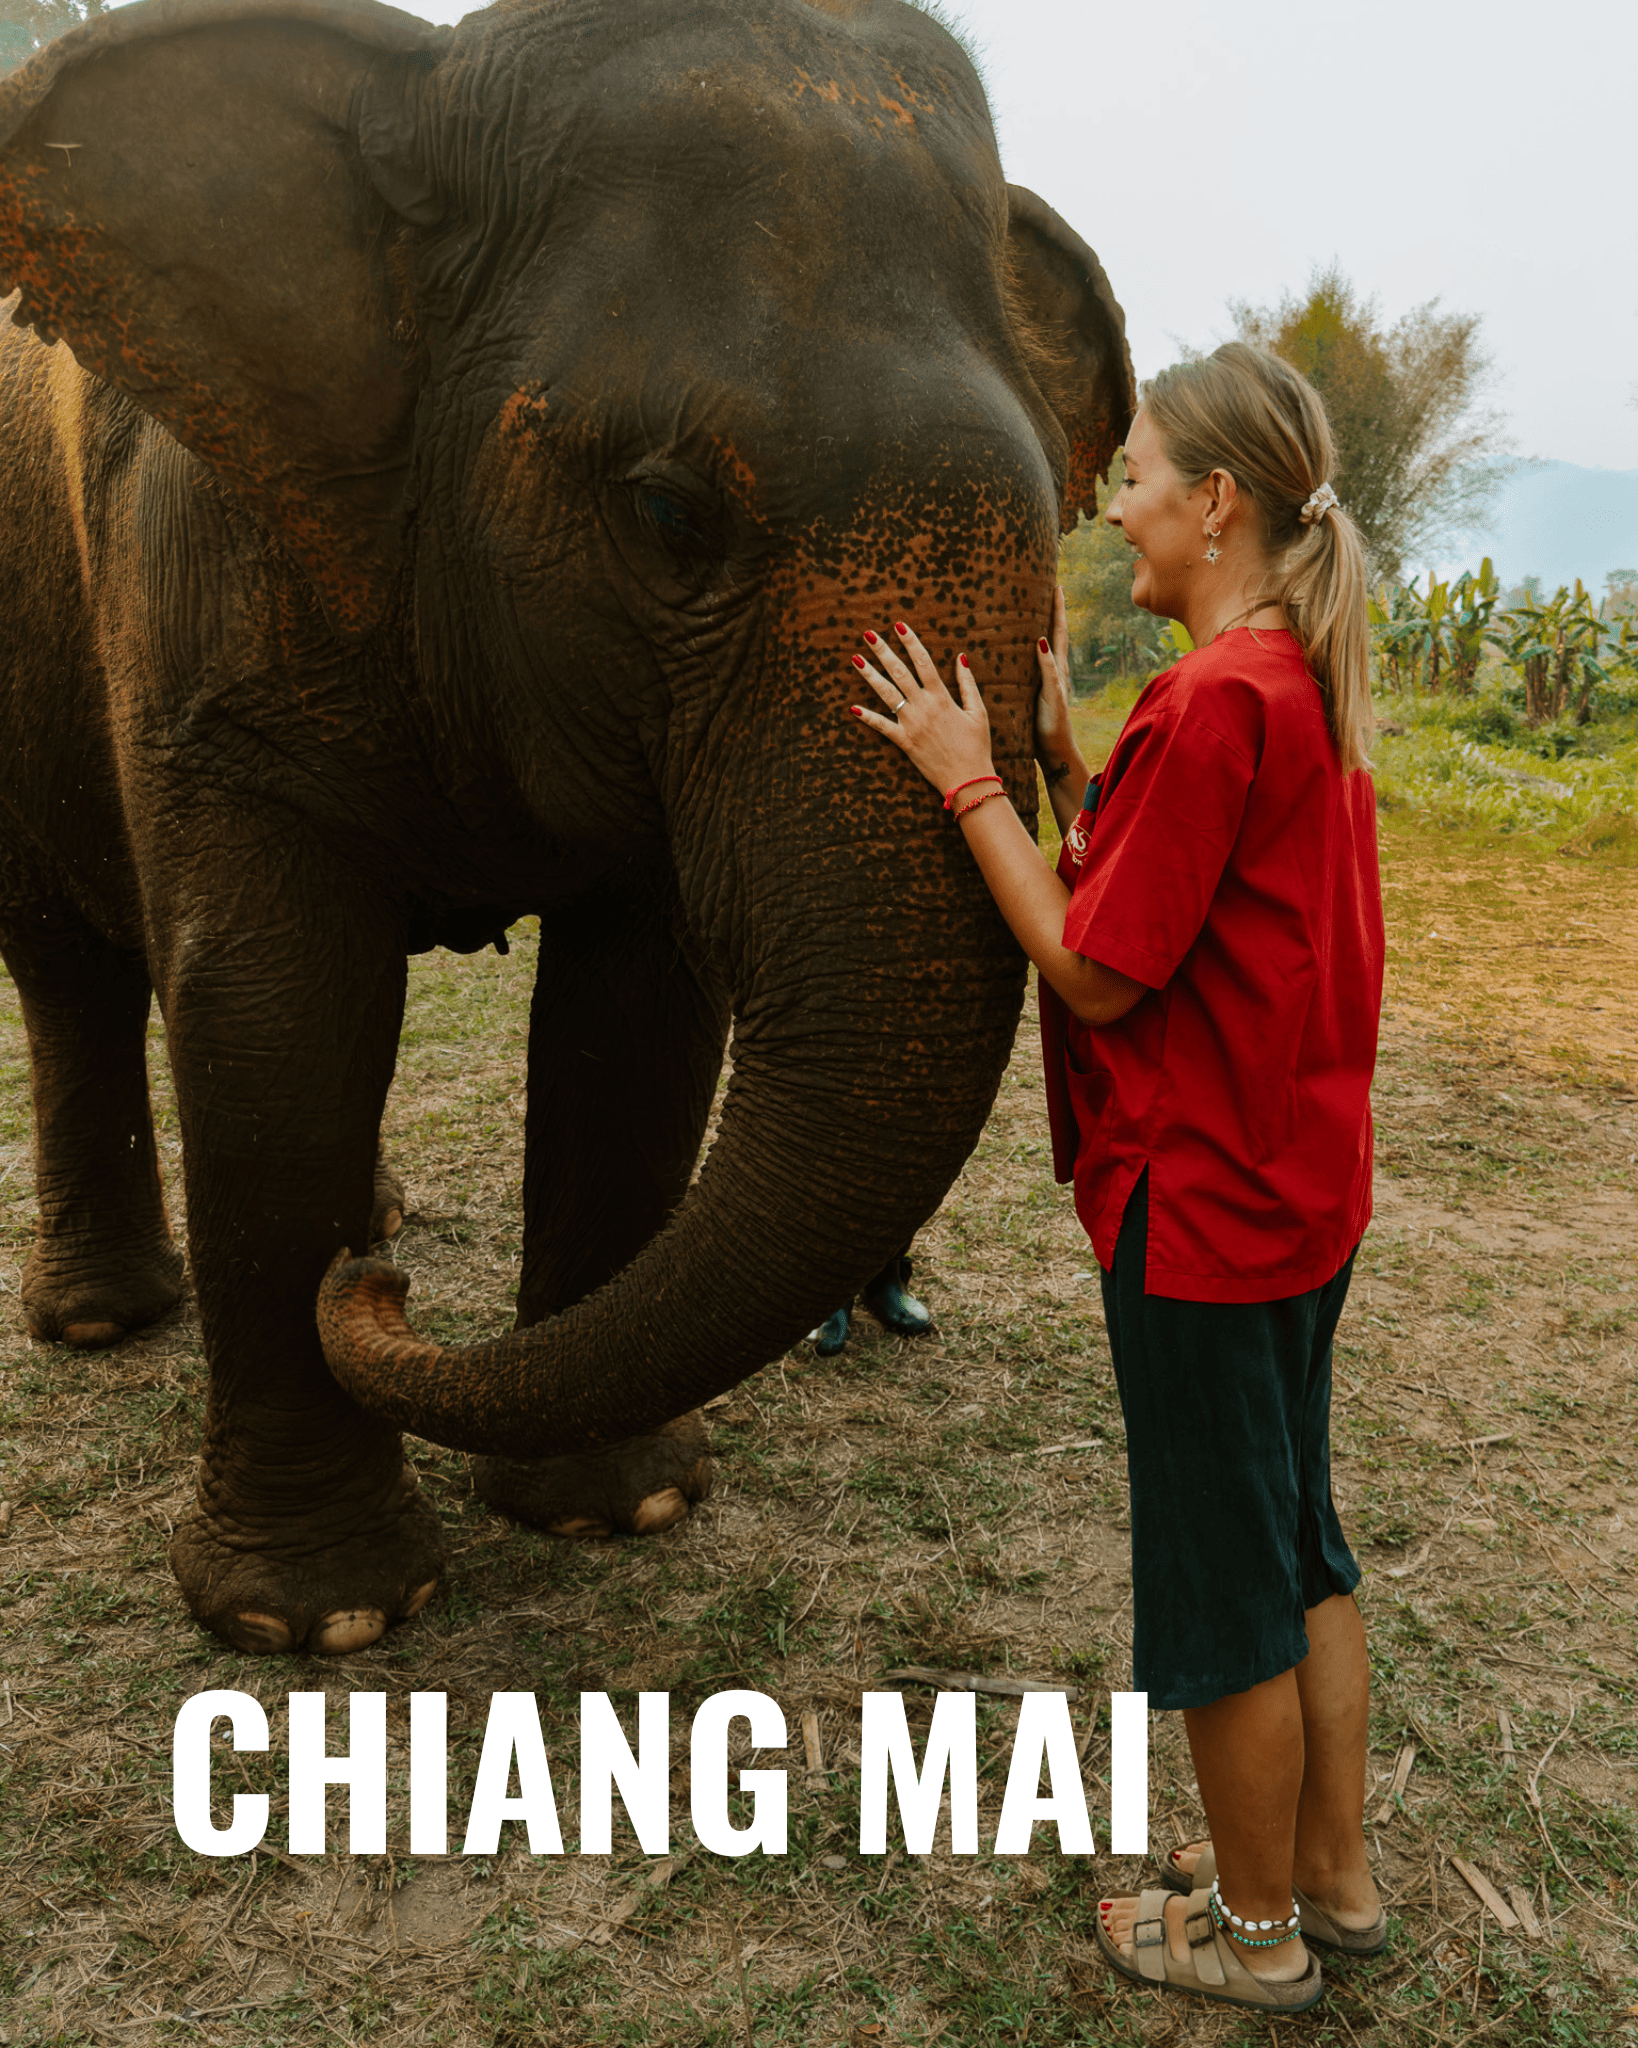 Chiang Mai, Thailand: 13 Best Things to Do cairns